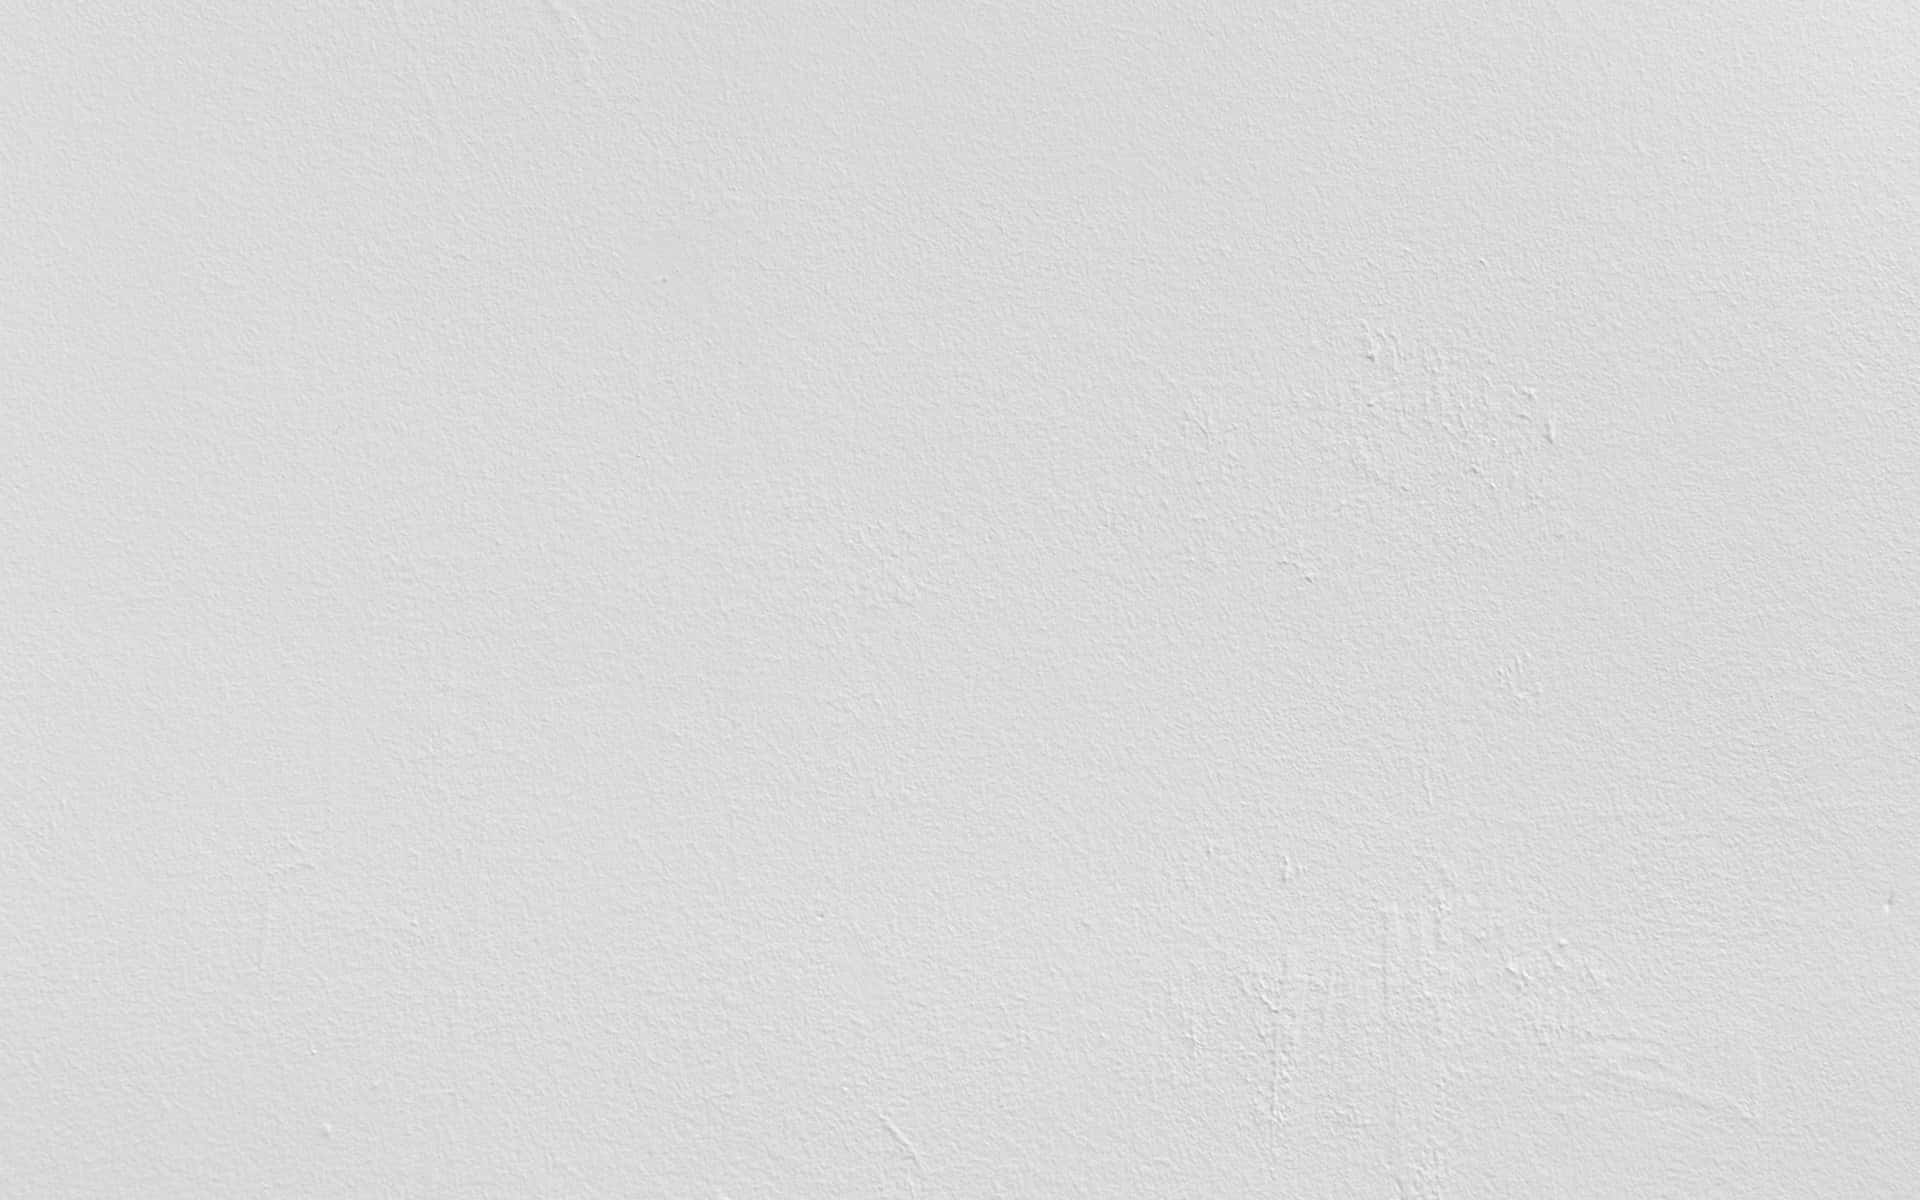 White Wall Background With A Feint Texture